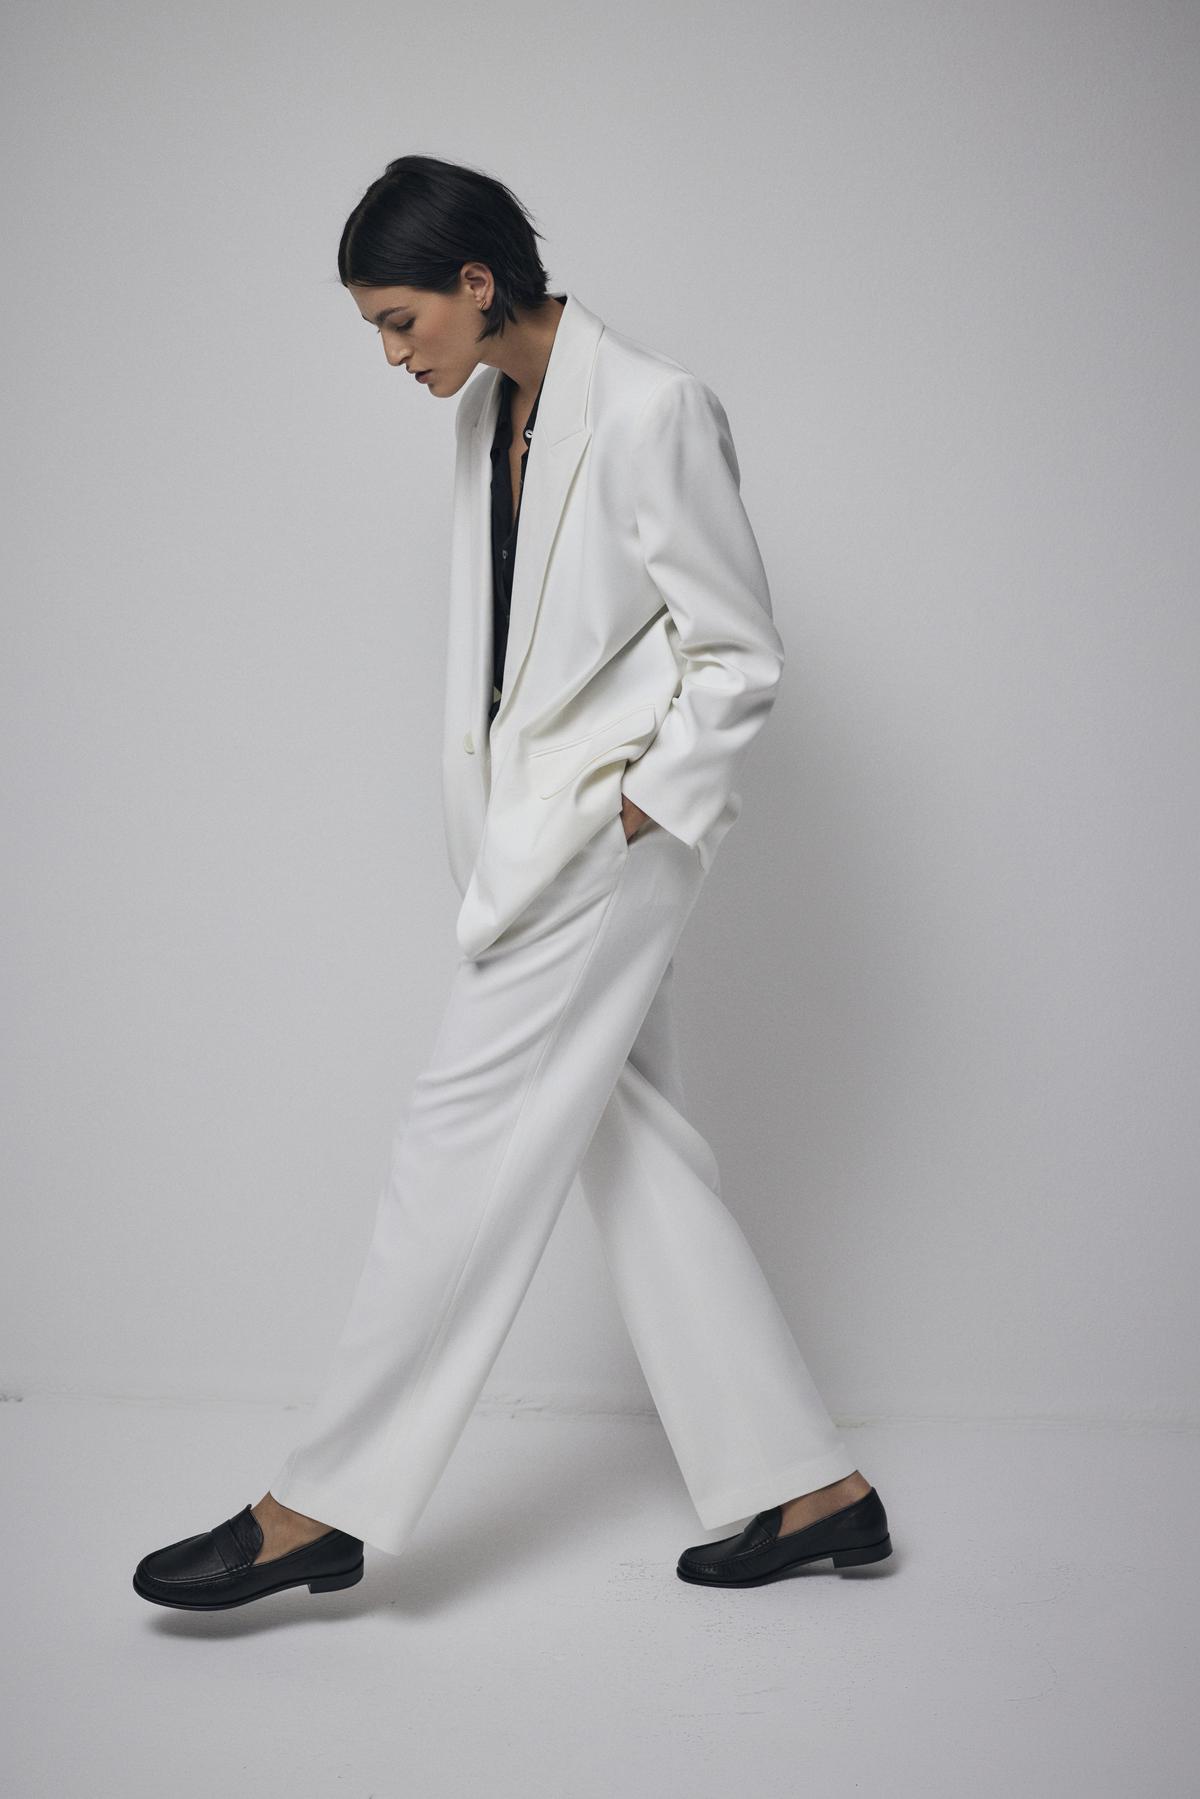   A woman donning a white suit, made of suiting fabric, paired with black shoes.
Product Name: BUNDY PANT
Brand Name: Velvet by Jenny Graham 